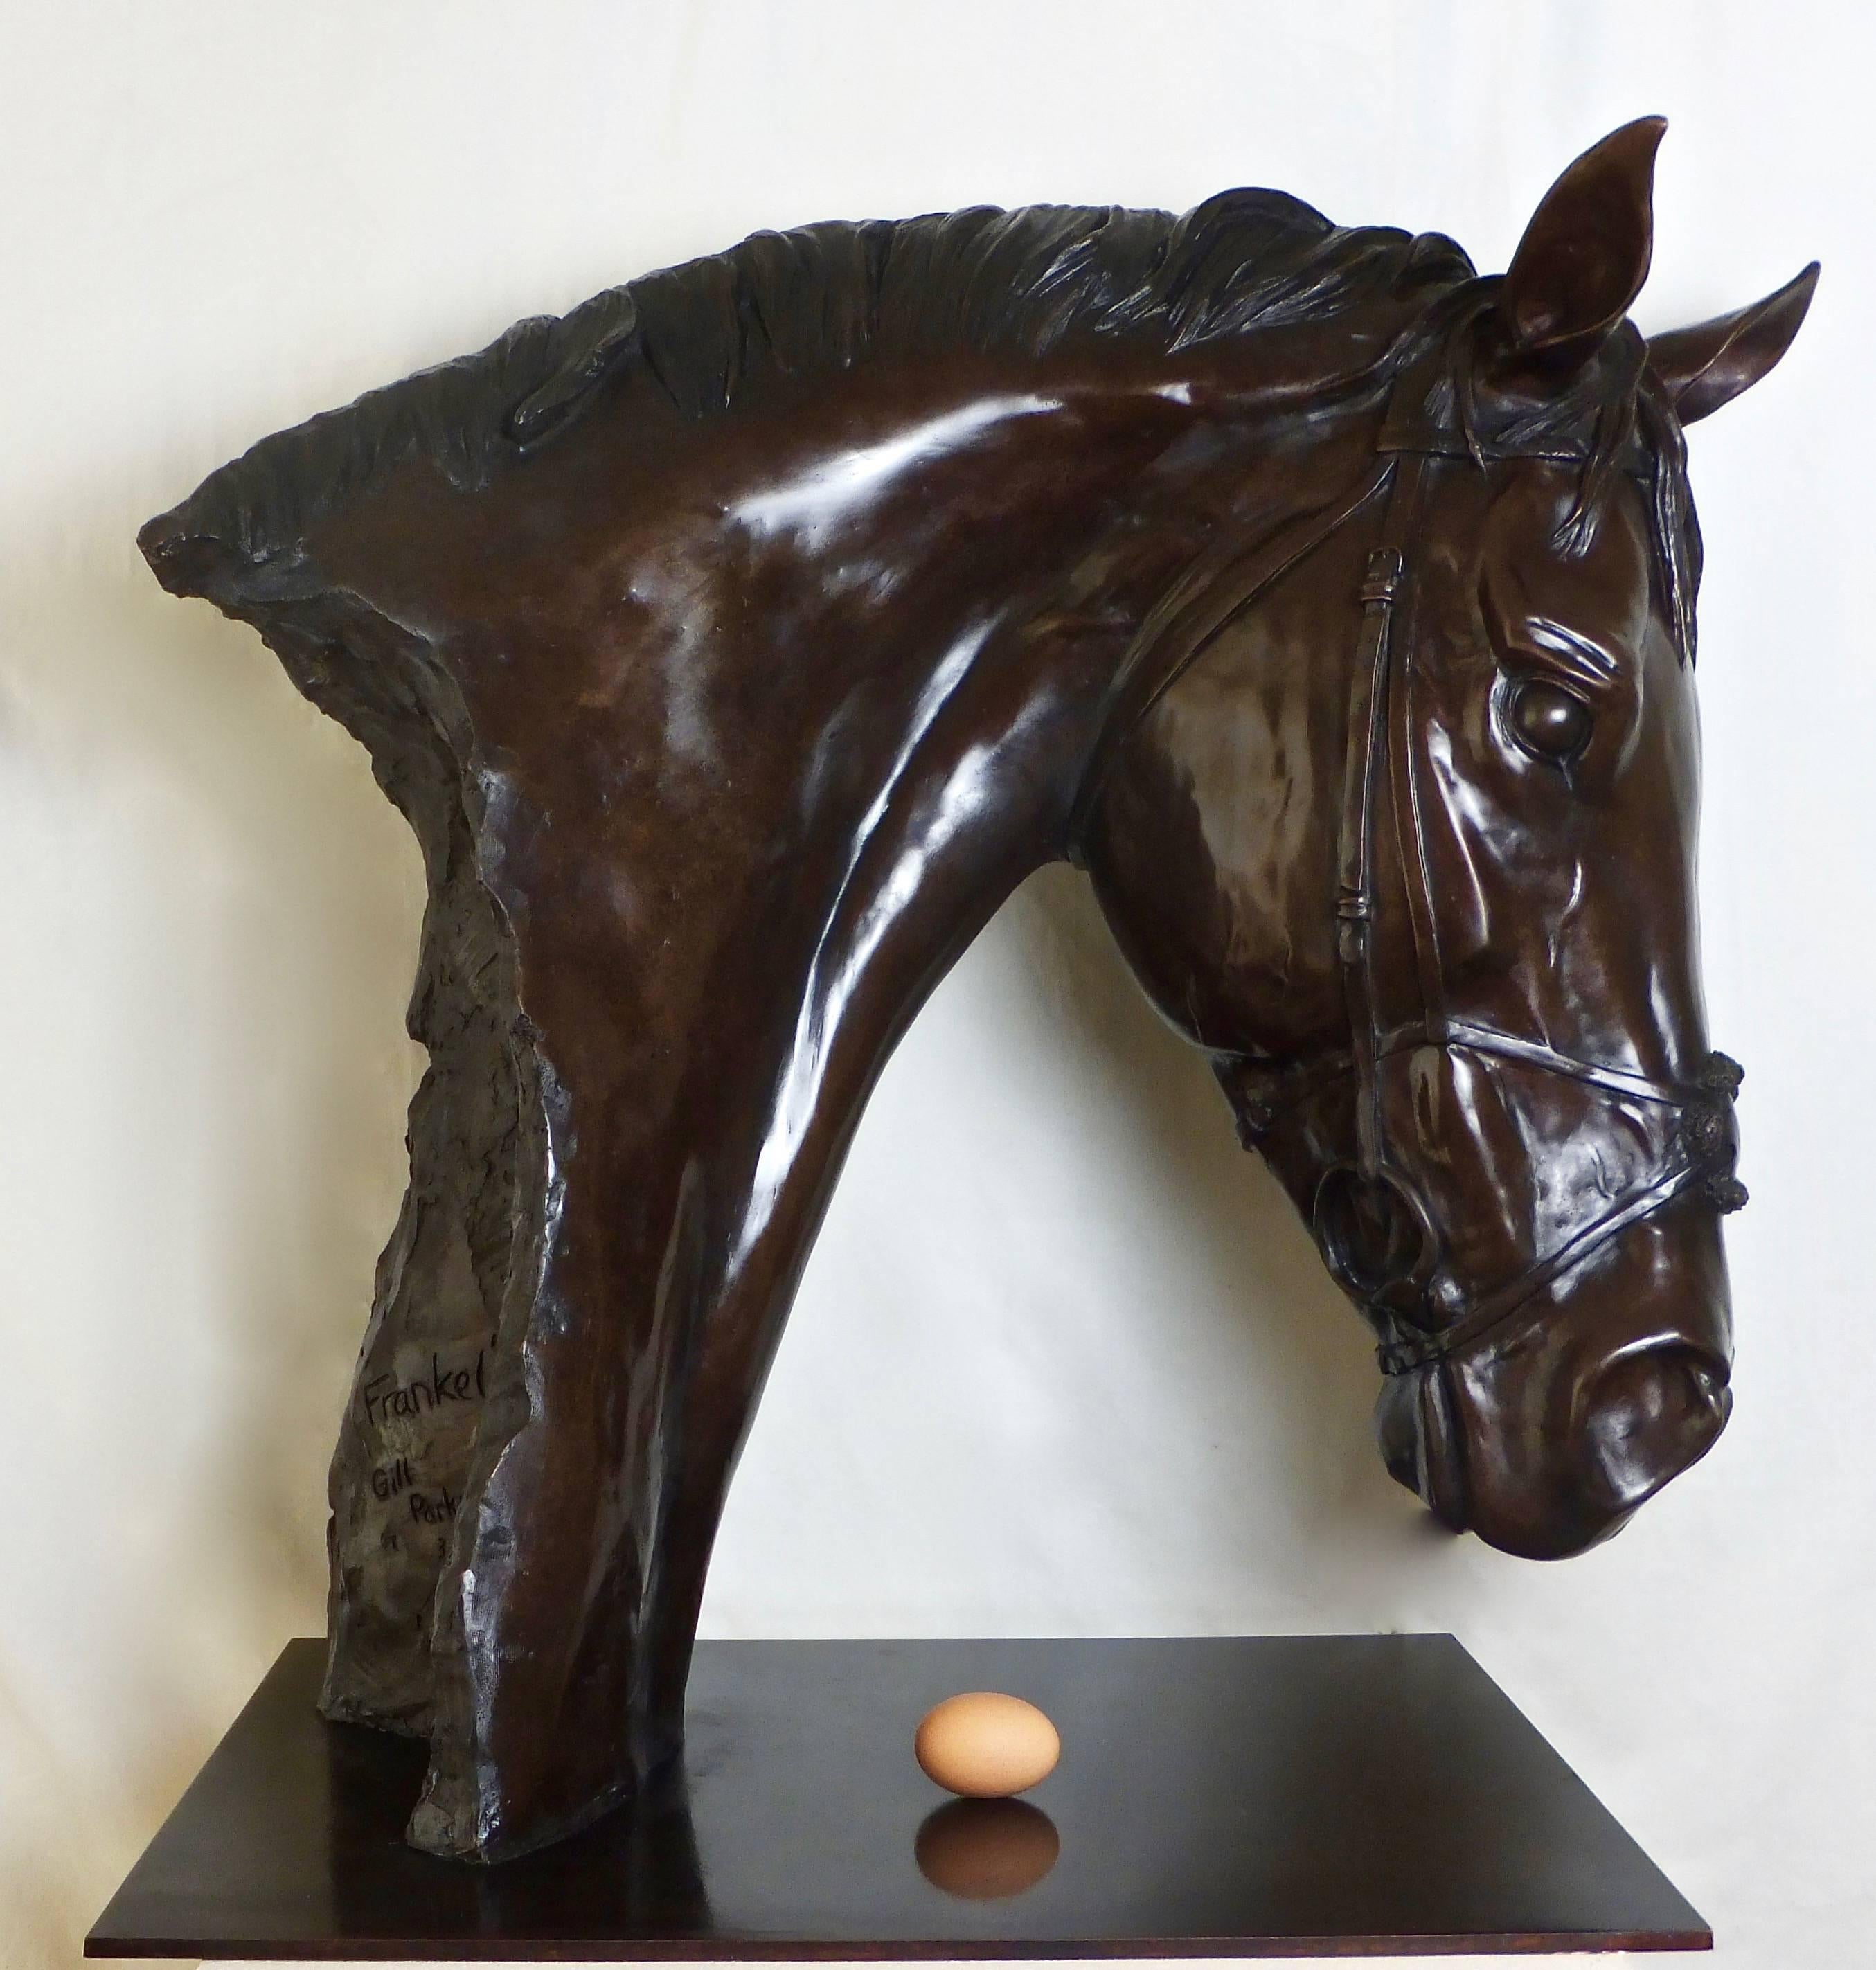 This glorious lifesize bronze study by Gill Parker of one of the worlds finest race horses, Frankel, is part of a world wide edition of only nine.

We are happy to offer complimentary worldwide shipping on this work for a limited time only.

The